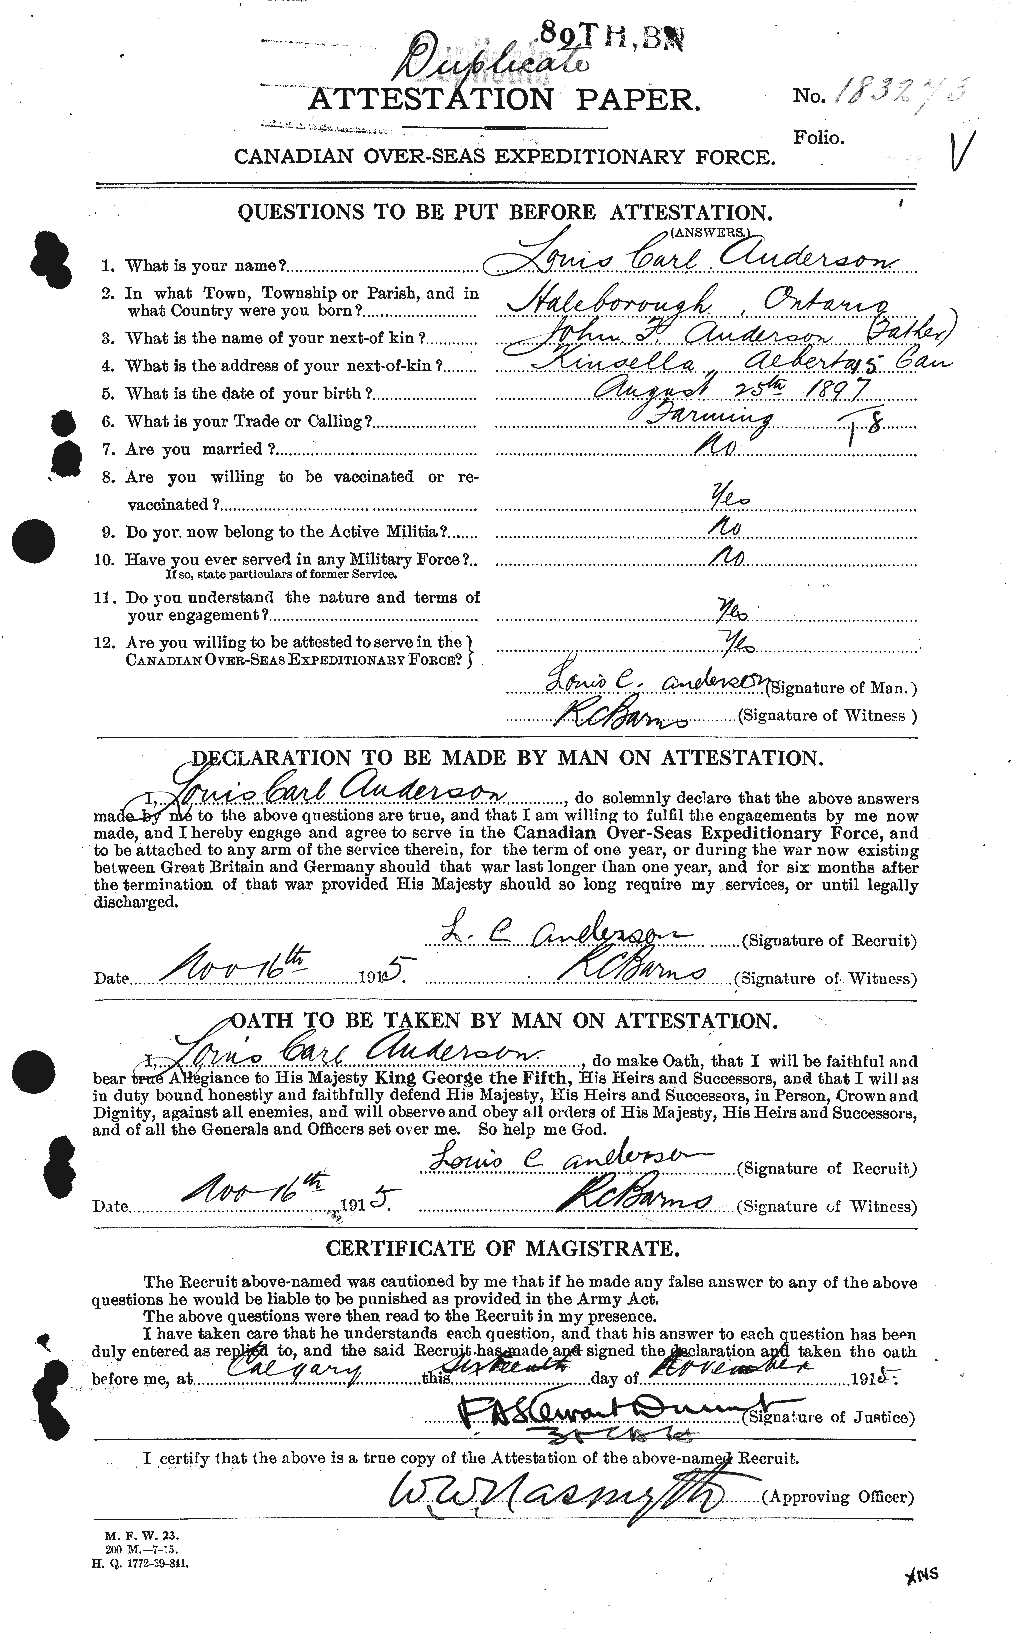 Personnel Records of the First World War - CEF 207500a